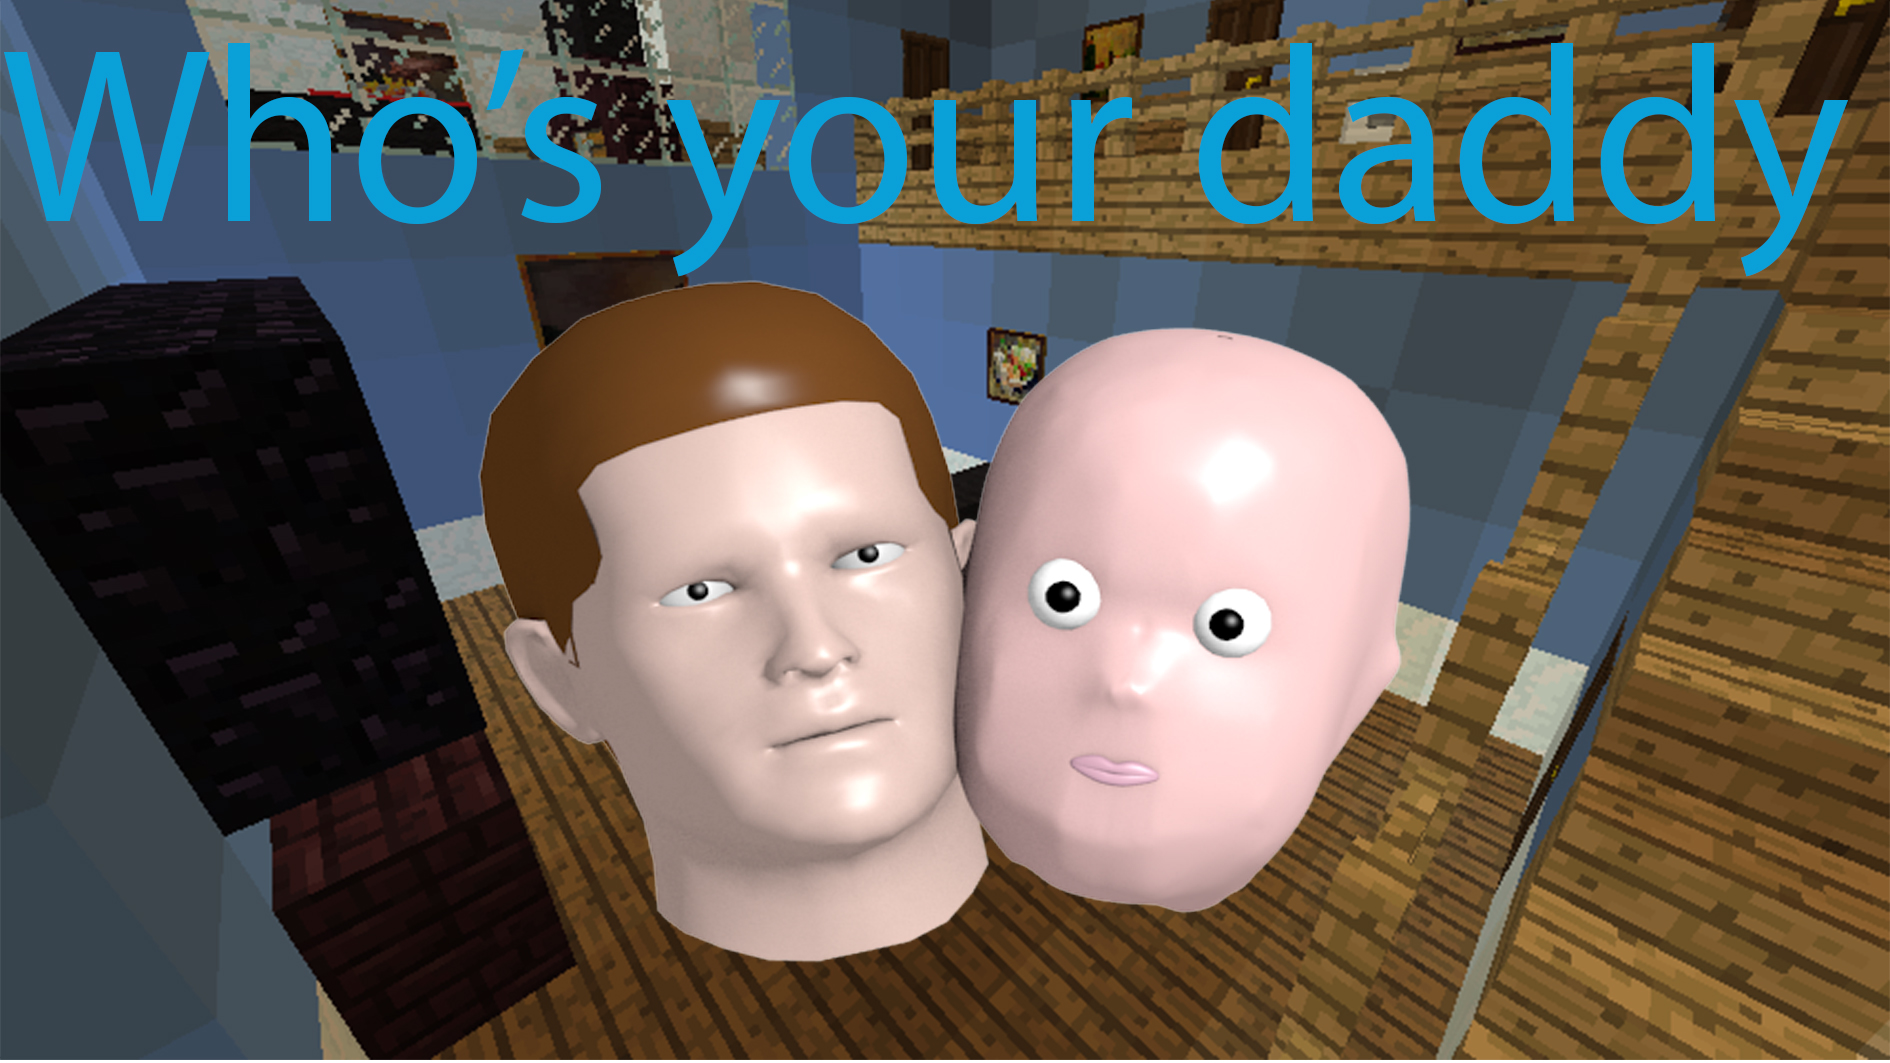 whos your daddy free oinline game